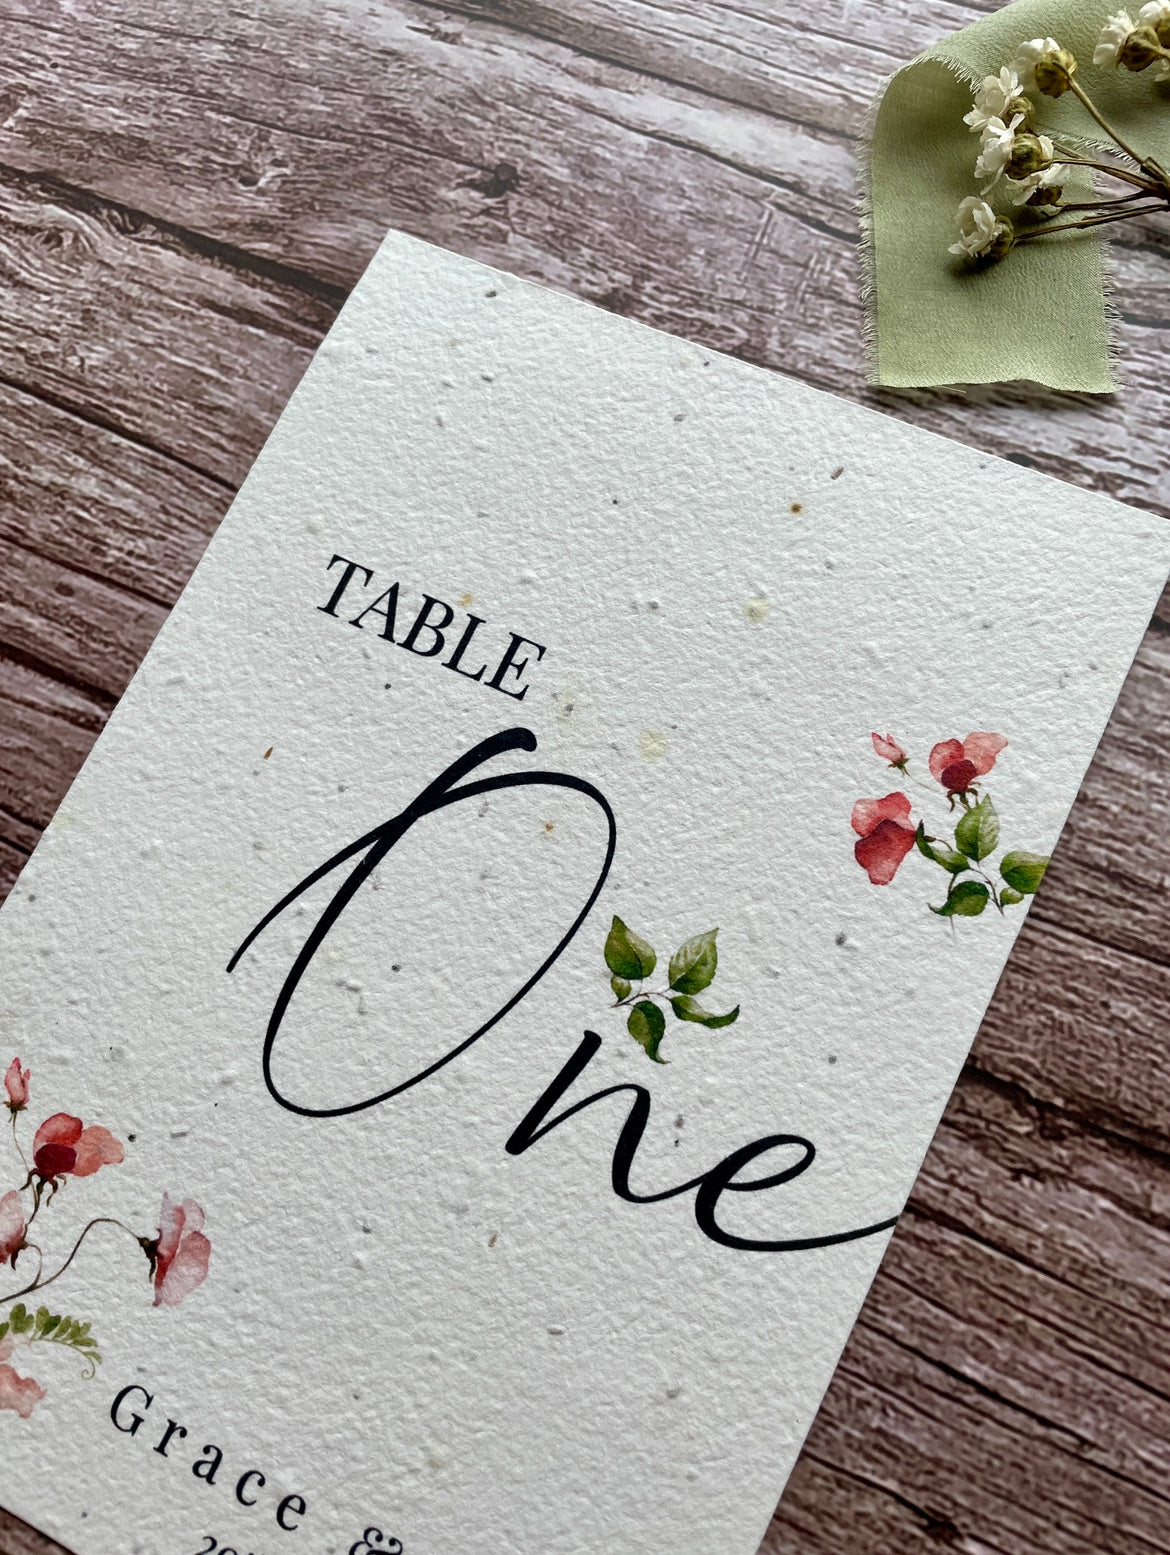 Plantable Wedding Table Number or Name Cards - Sweet Pea